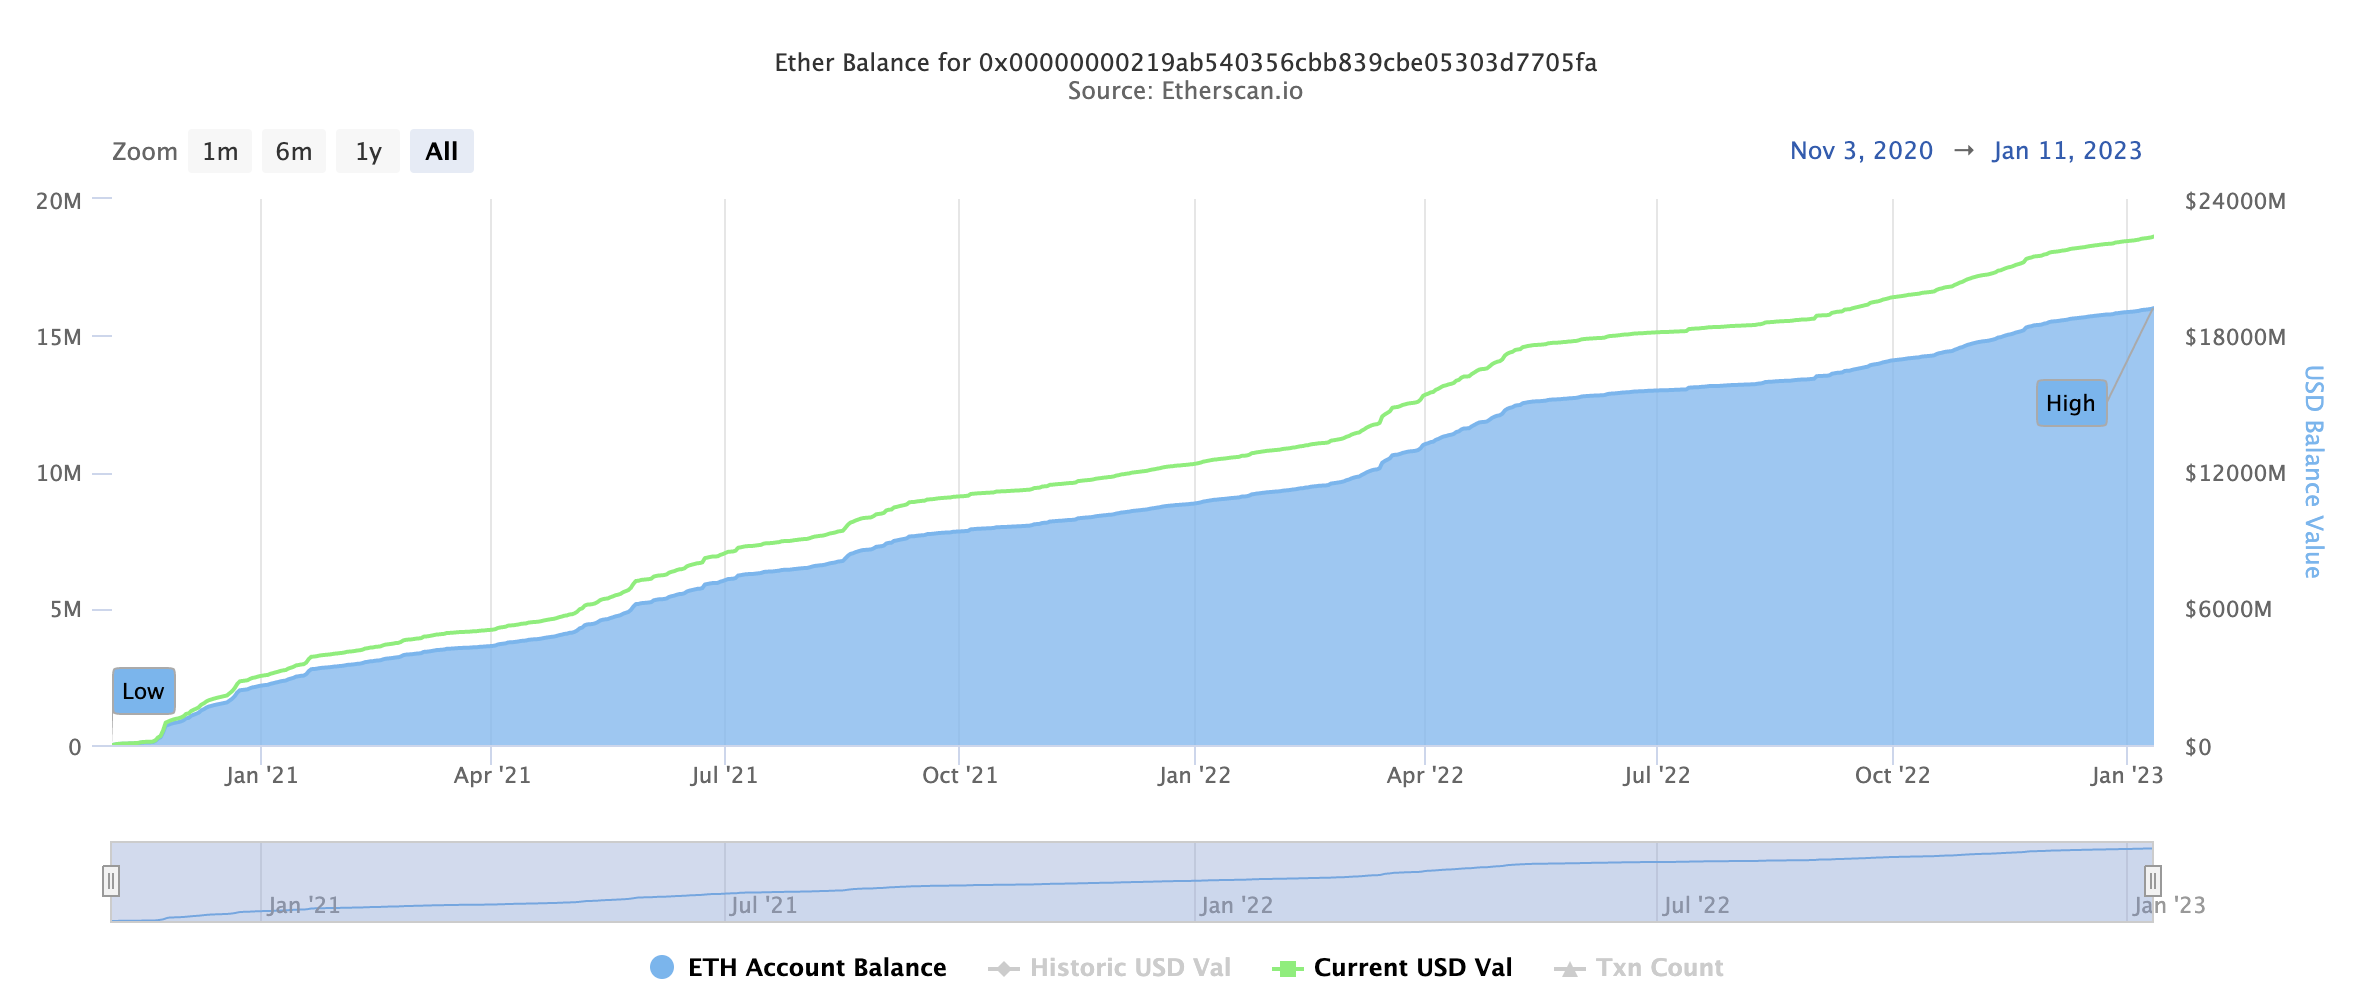 Number of staked ETH passes 16M